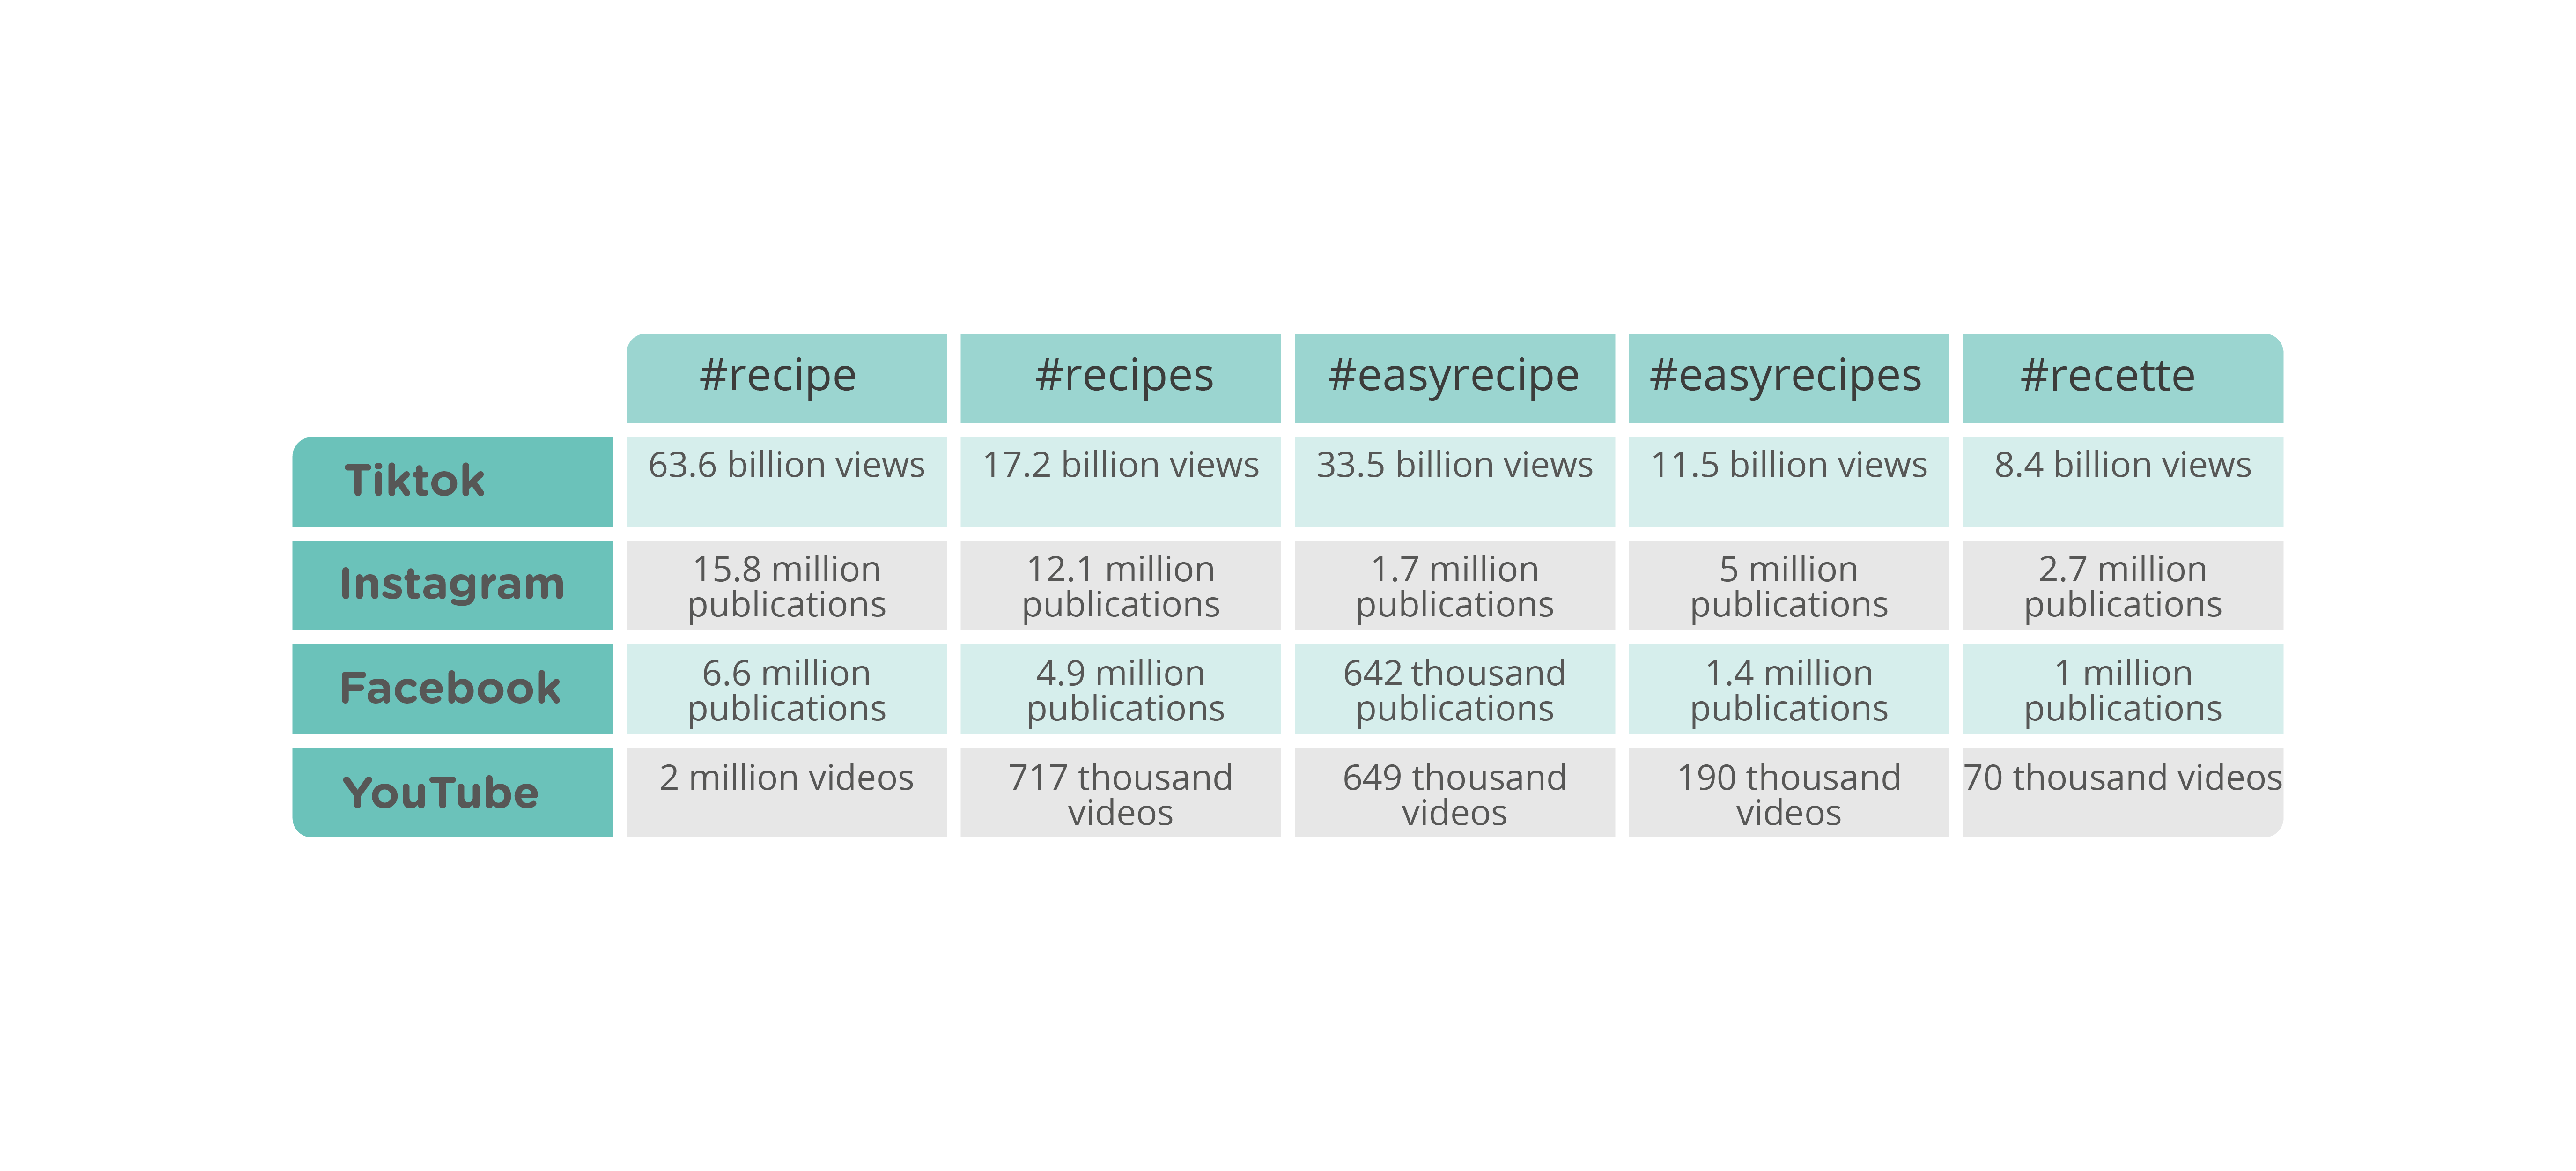 This table shows the number of publications with the #recipe, #recipes #easyrecipe, #easyrecipes #recette hashtags on selected social media